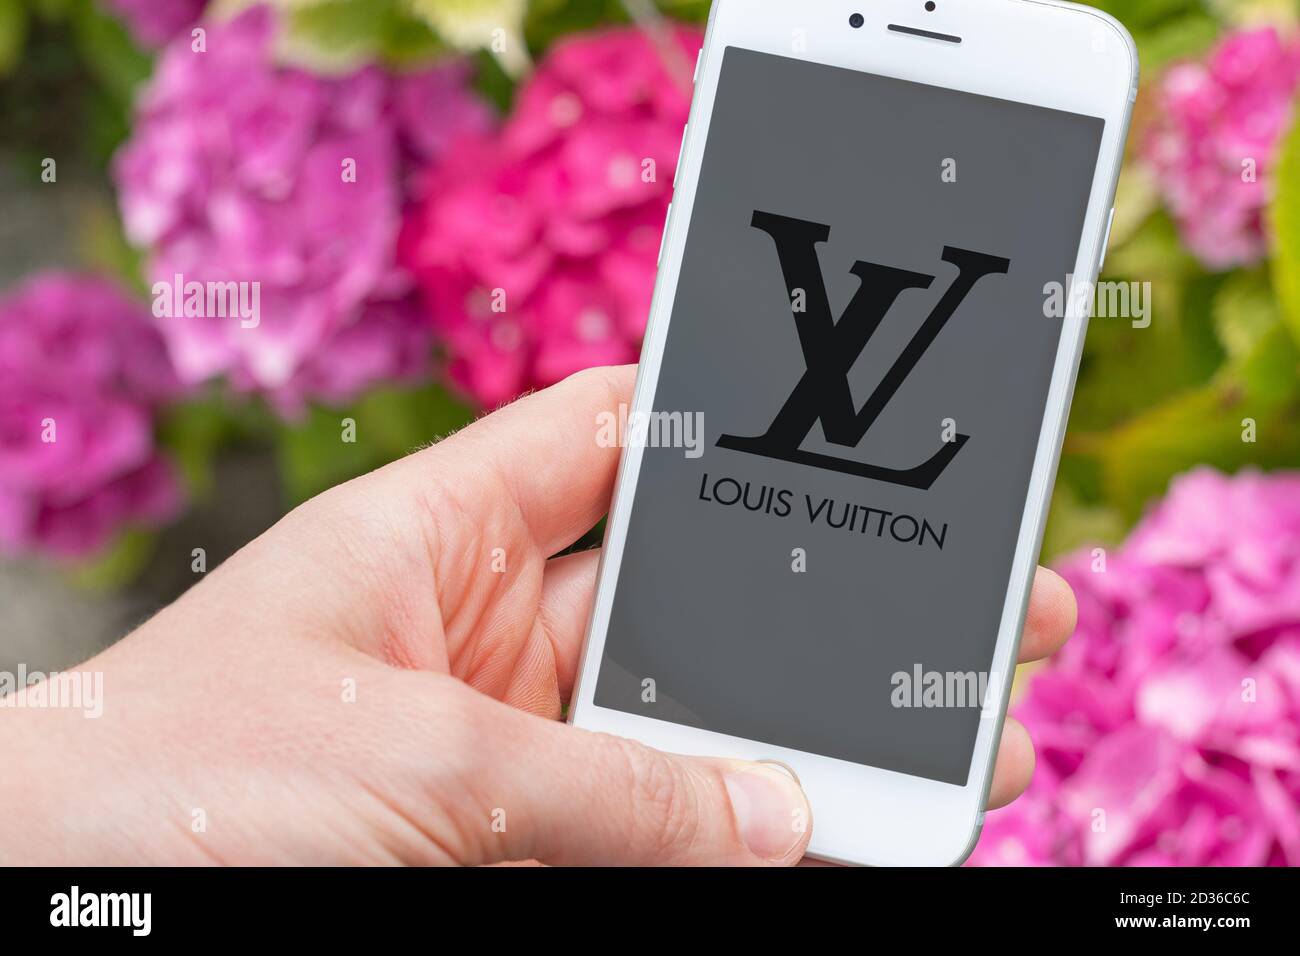 Guilherand-Granges, France - October 07, 2020. Person holding smartphone with Louis Vuitton logo. Louis Vuitton is a French fashion house and luxury g Stock Photo